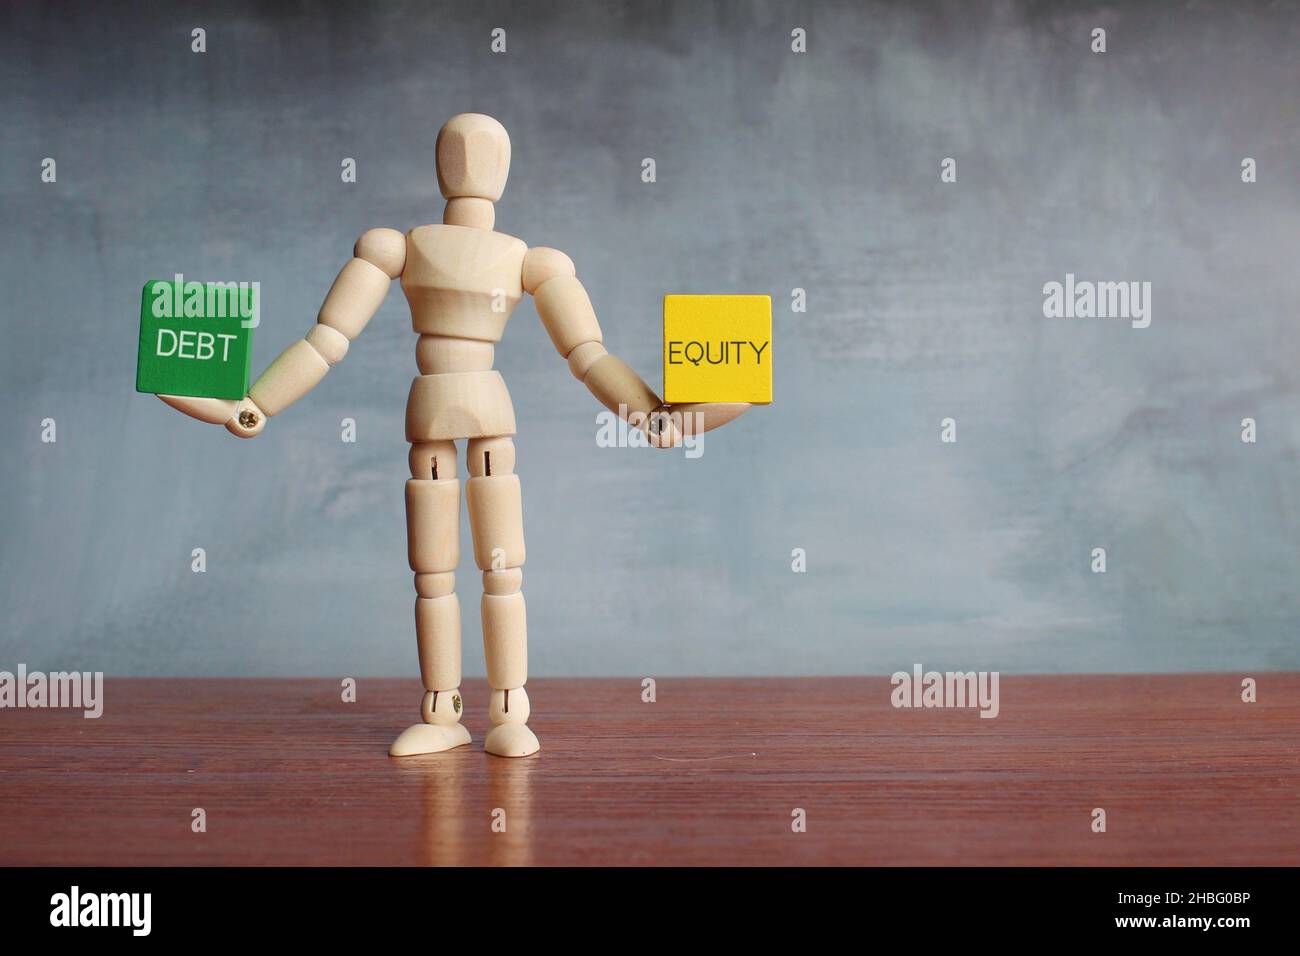 Debt and equity balance concept. Wooden human figure balancing wooden cubes with text DEBT and EQUITY. Stock Photo